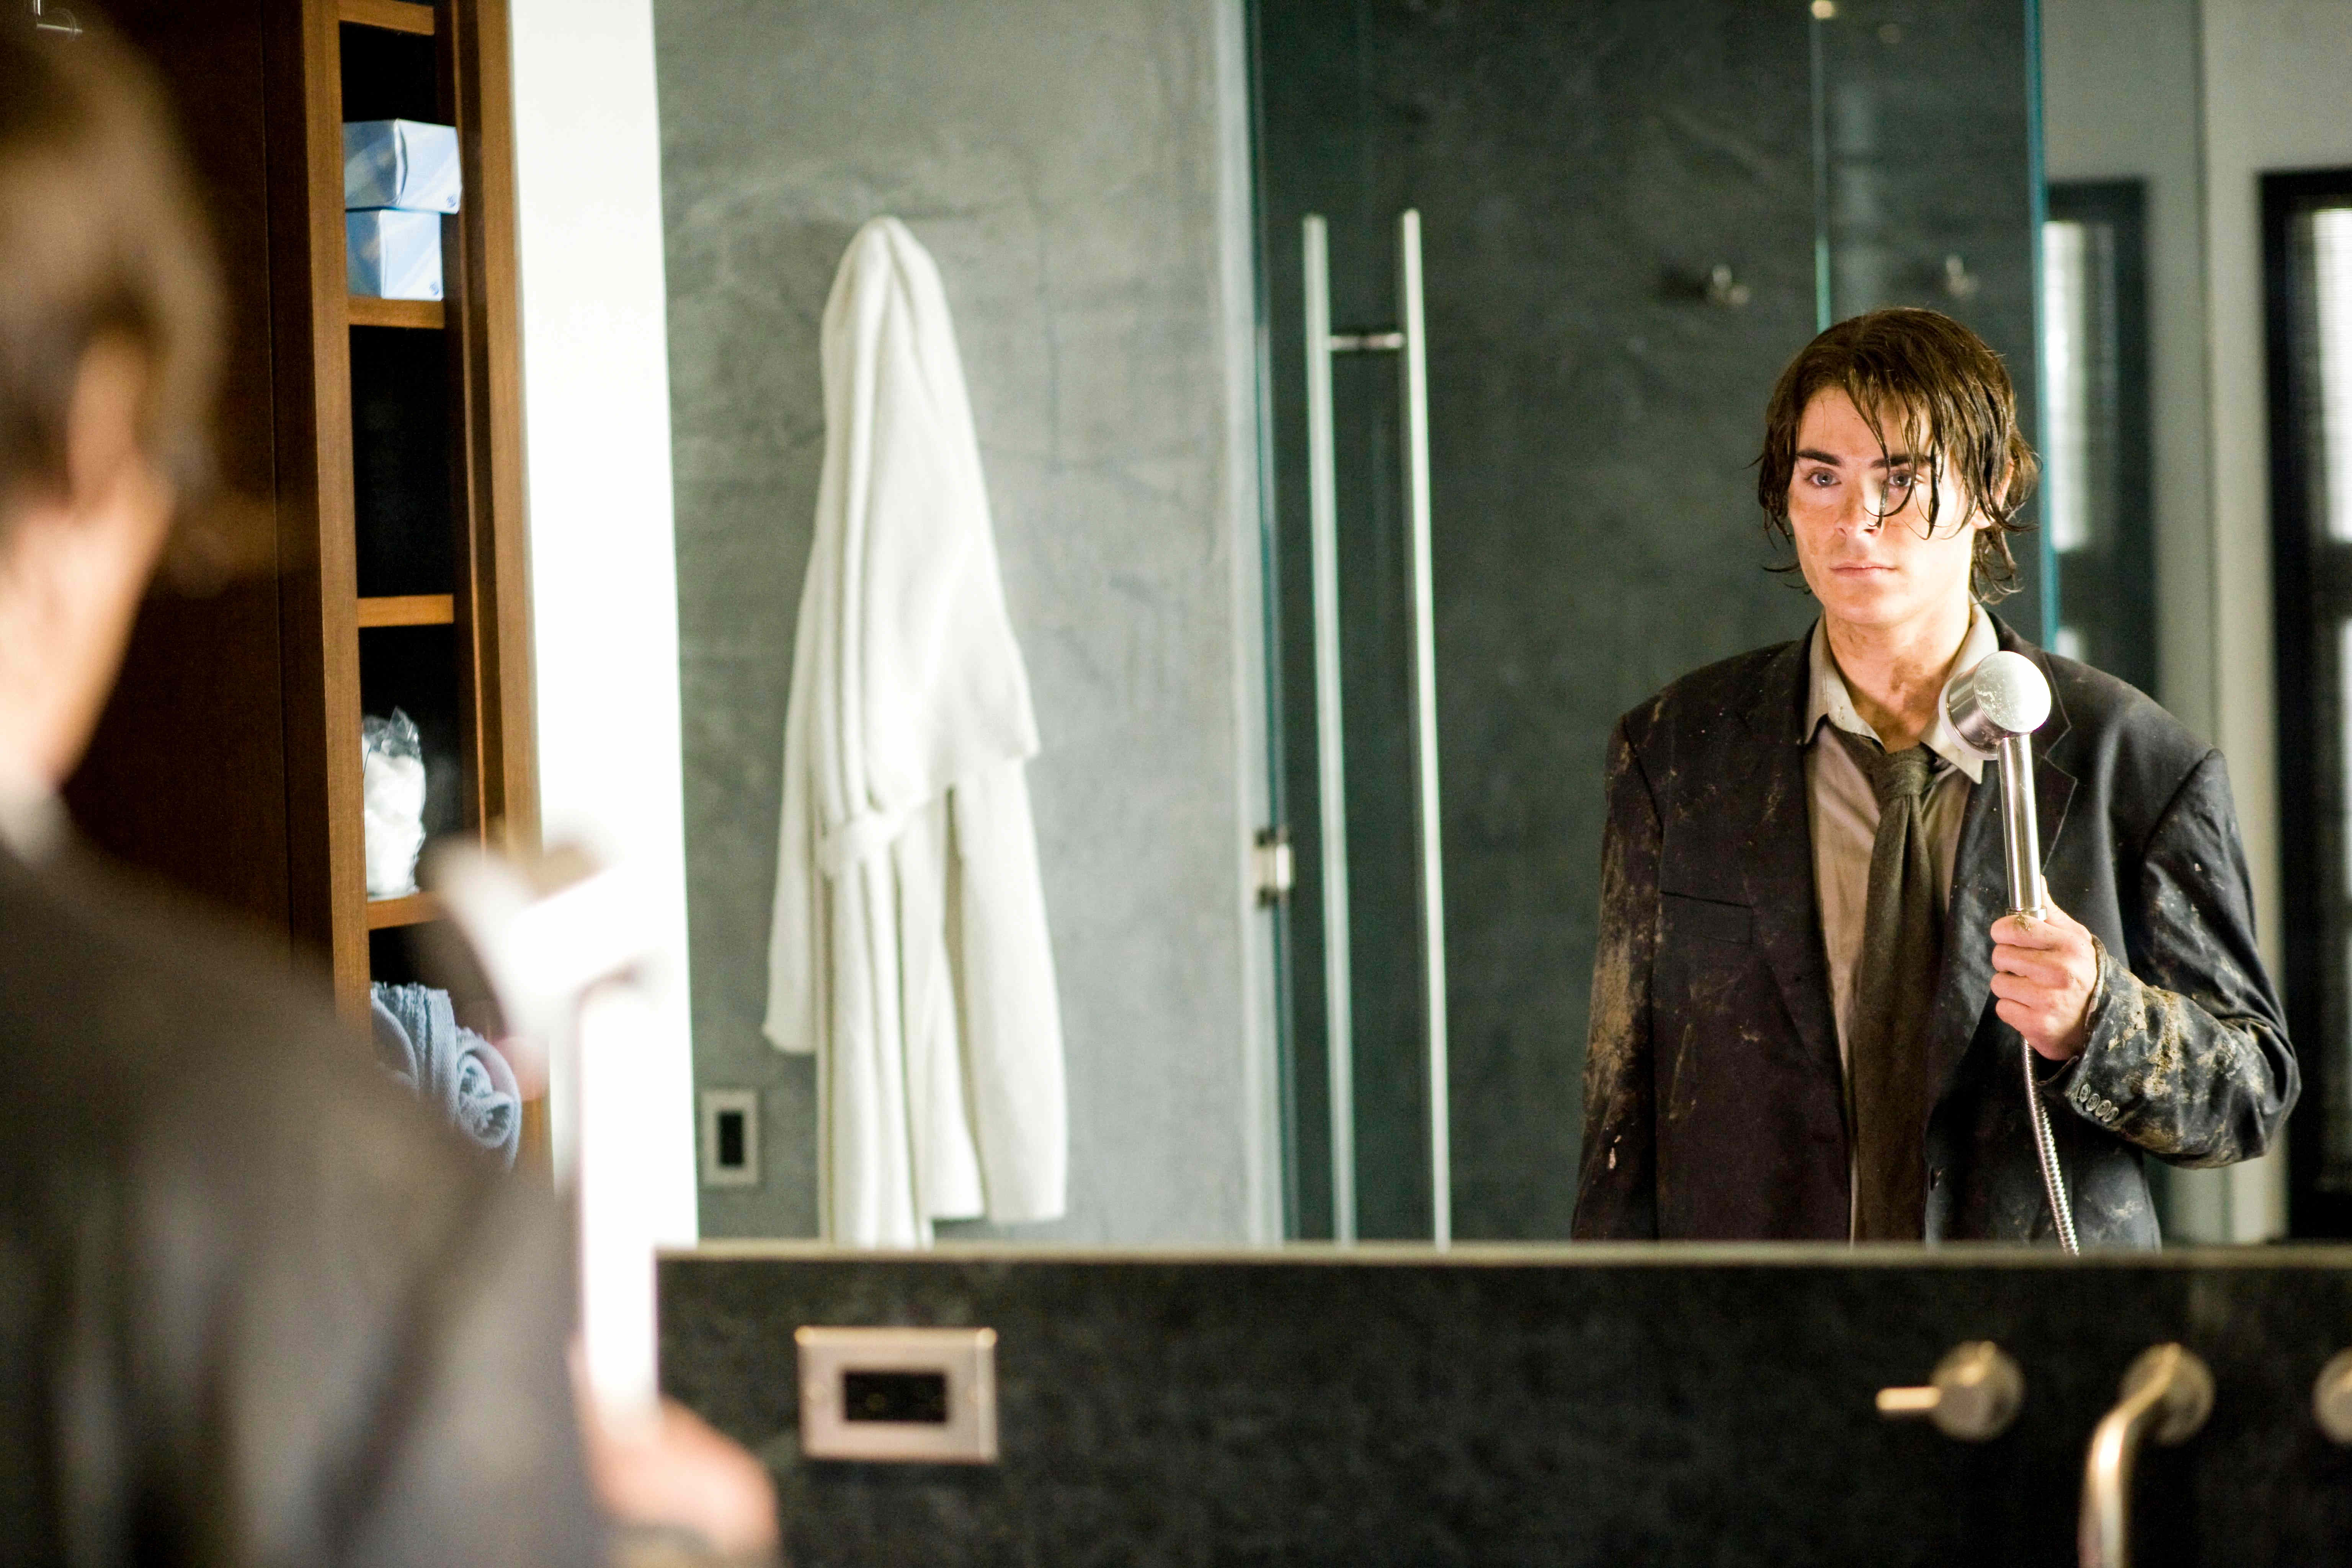 Zac Efron stars as Mike O' Donnell at 17 in New Line Cinema's 17 Again (2009). Photo credit by Chuck Zlotnick.